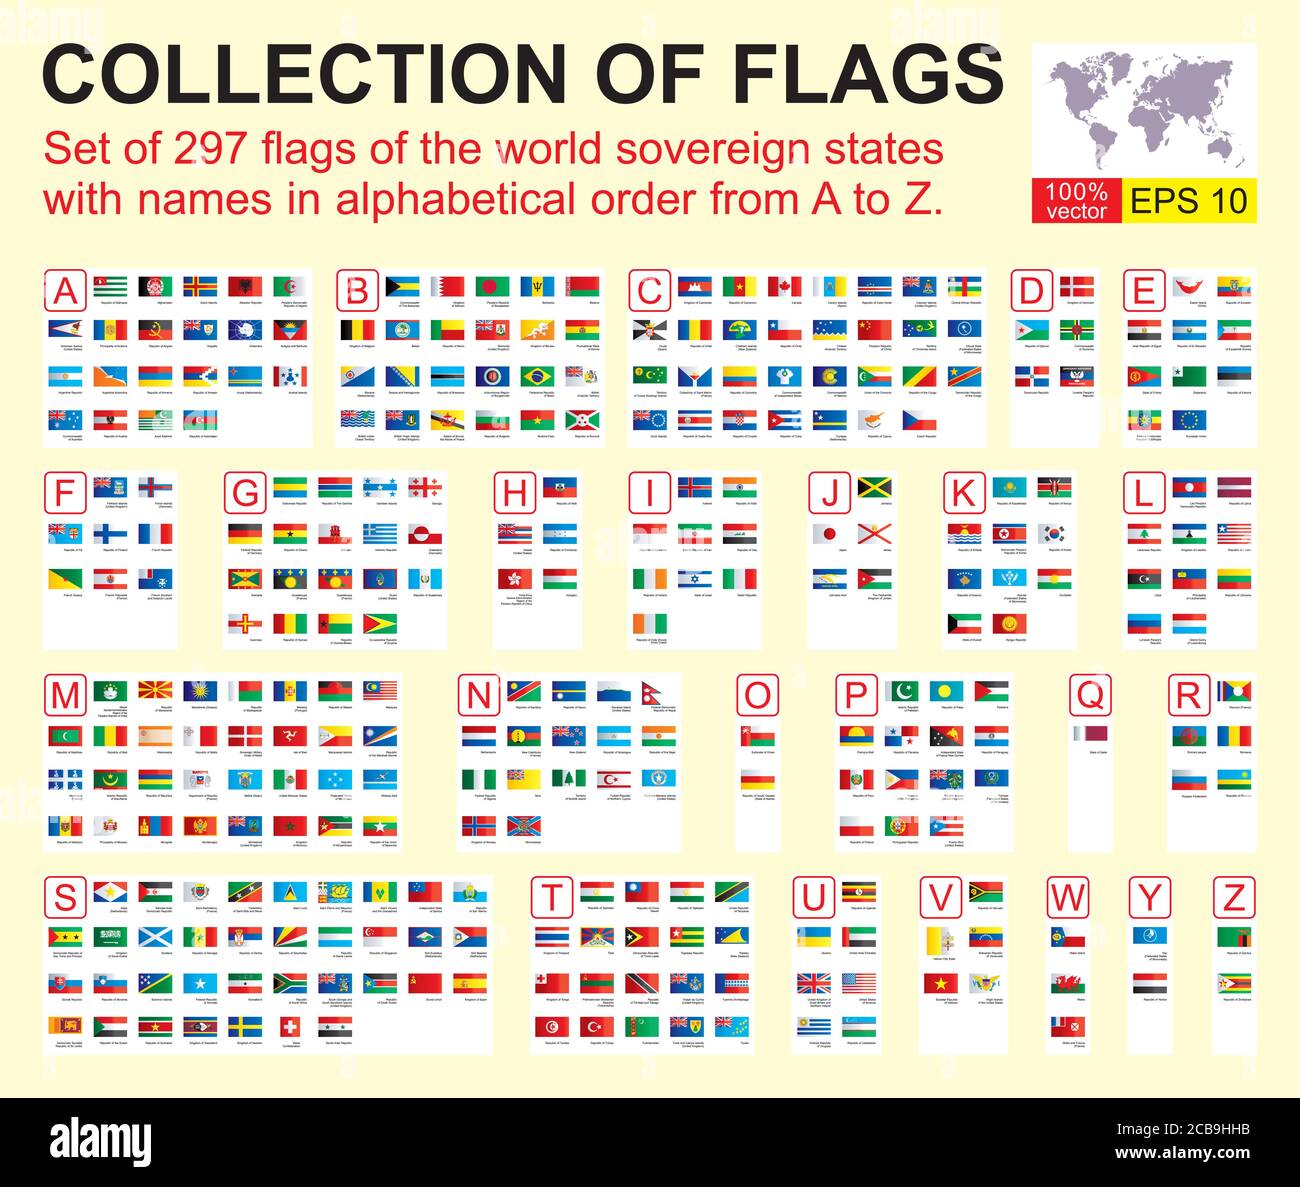 flags-of-the-world-in-alphabetical-order